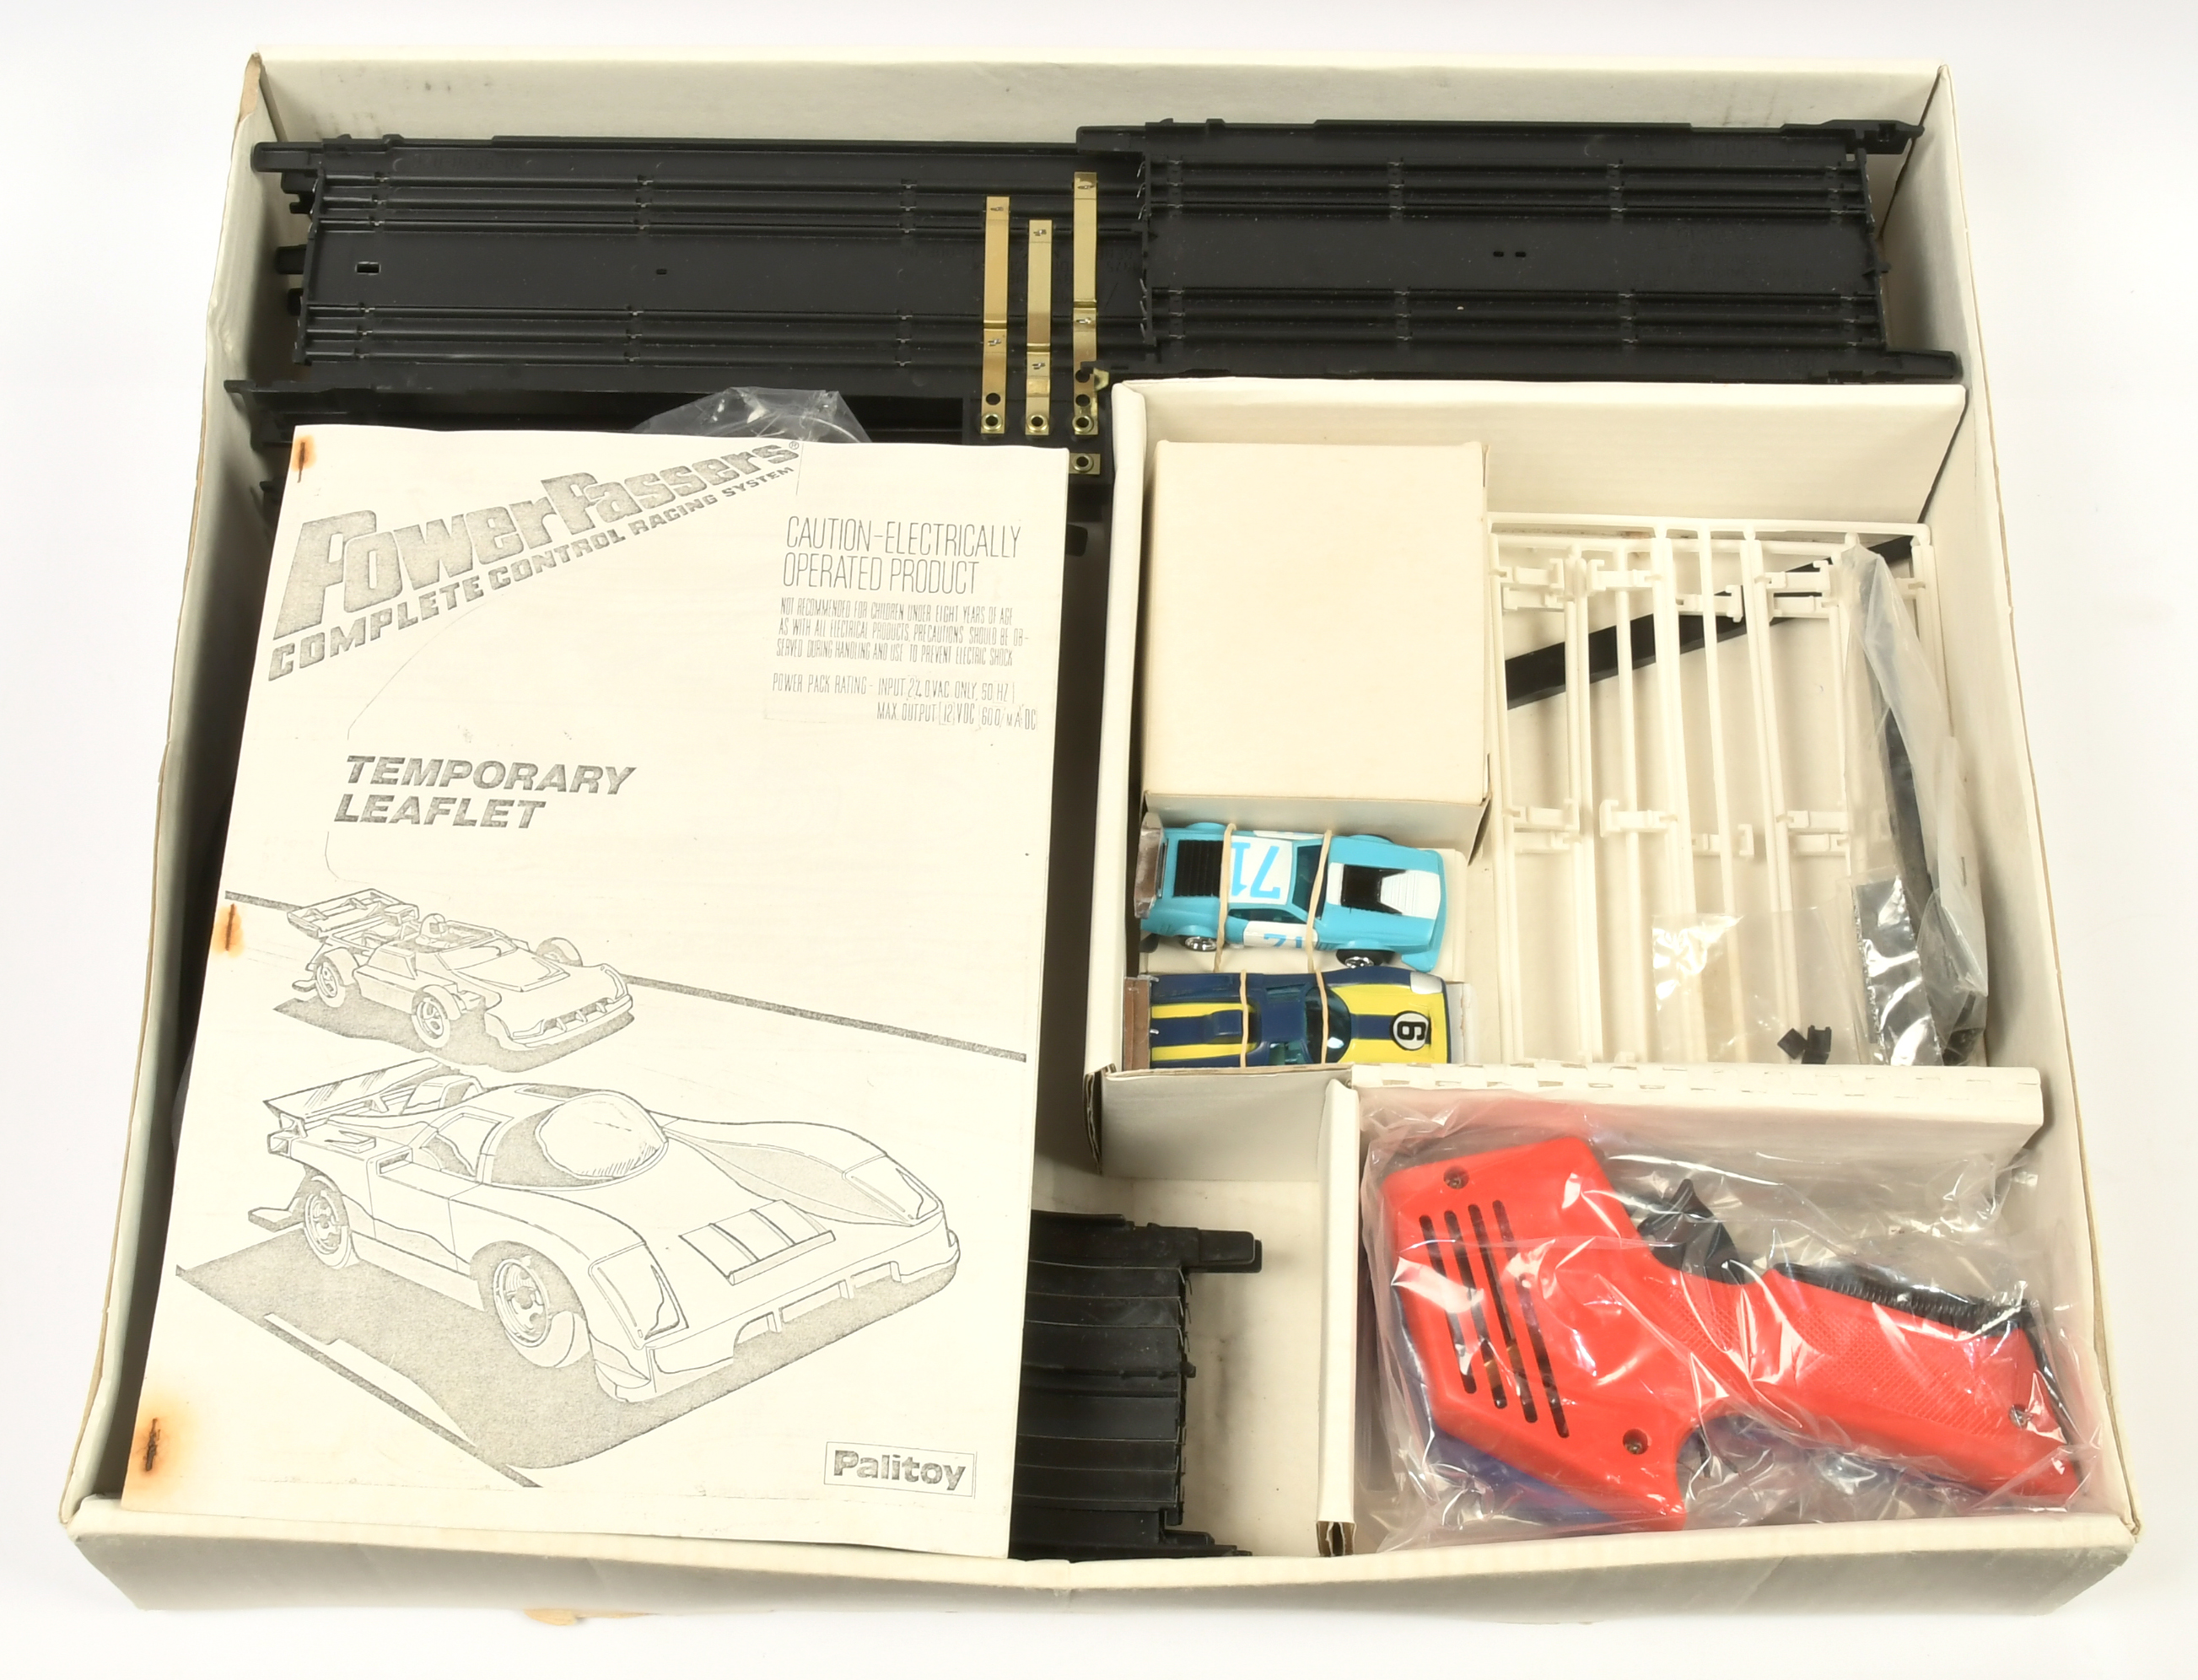 Palitoy Lionel Power Passers PAIR OF FACTORY SAMPLE SLOT CAR RACING SETS - Image 2 of 3